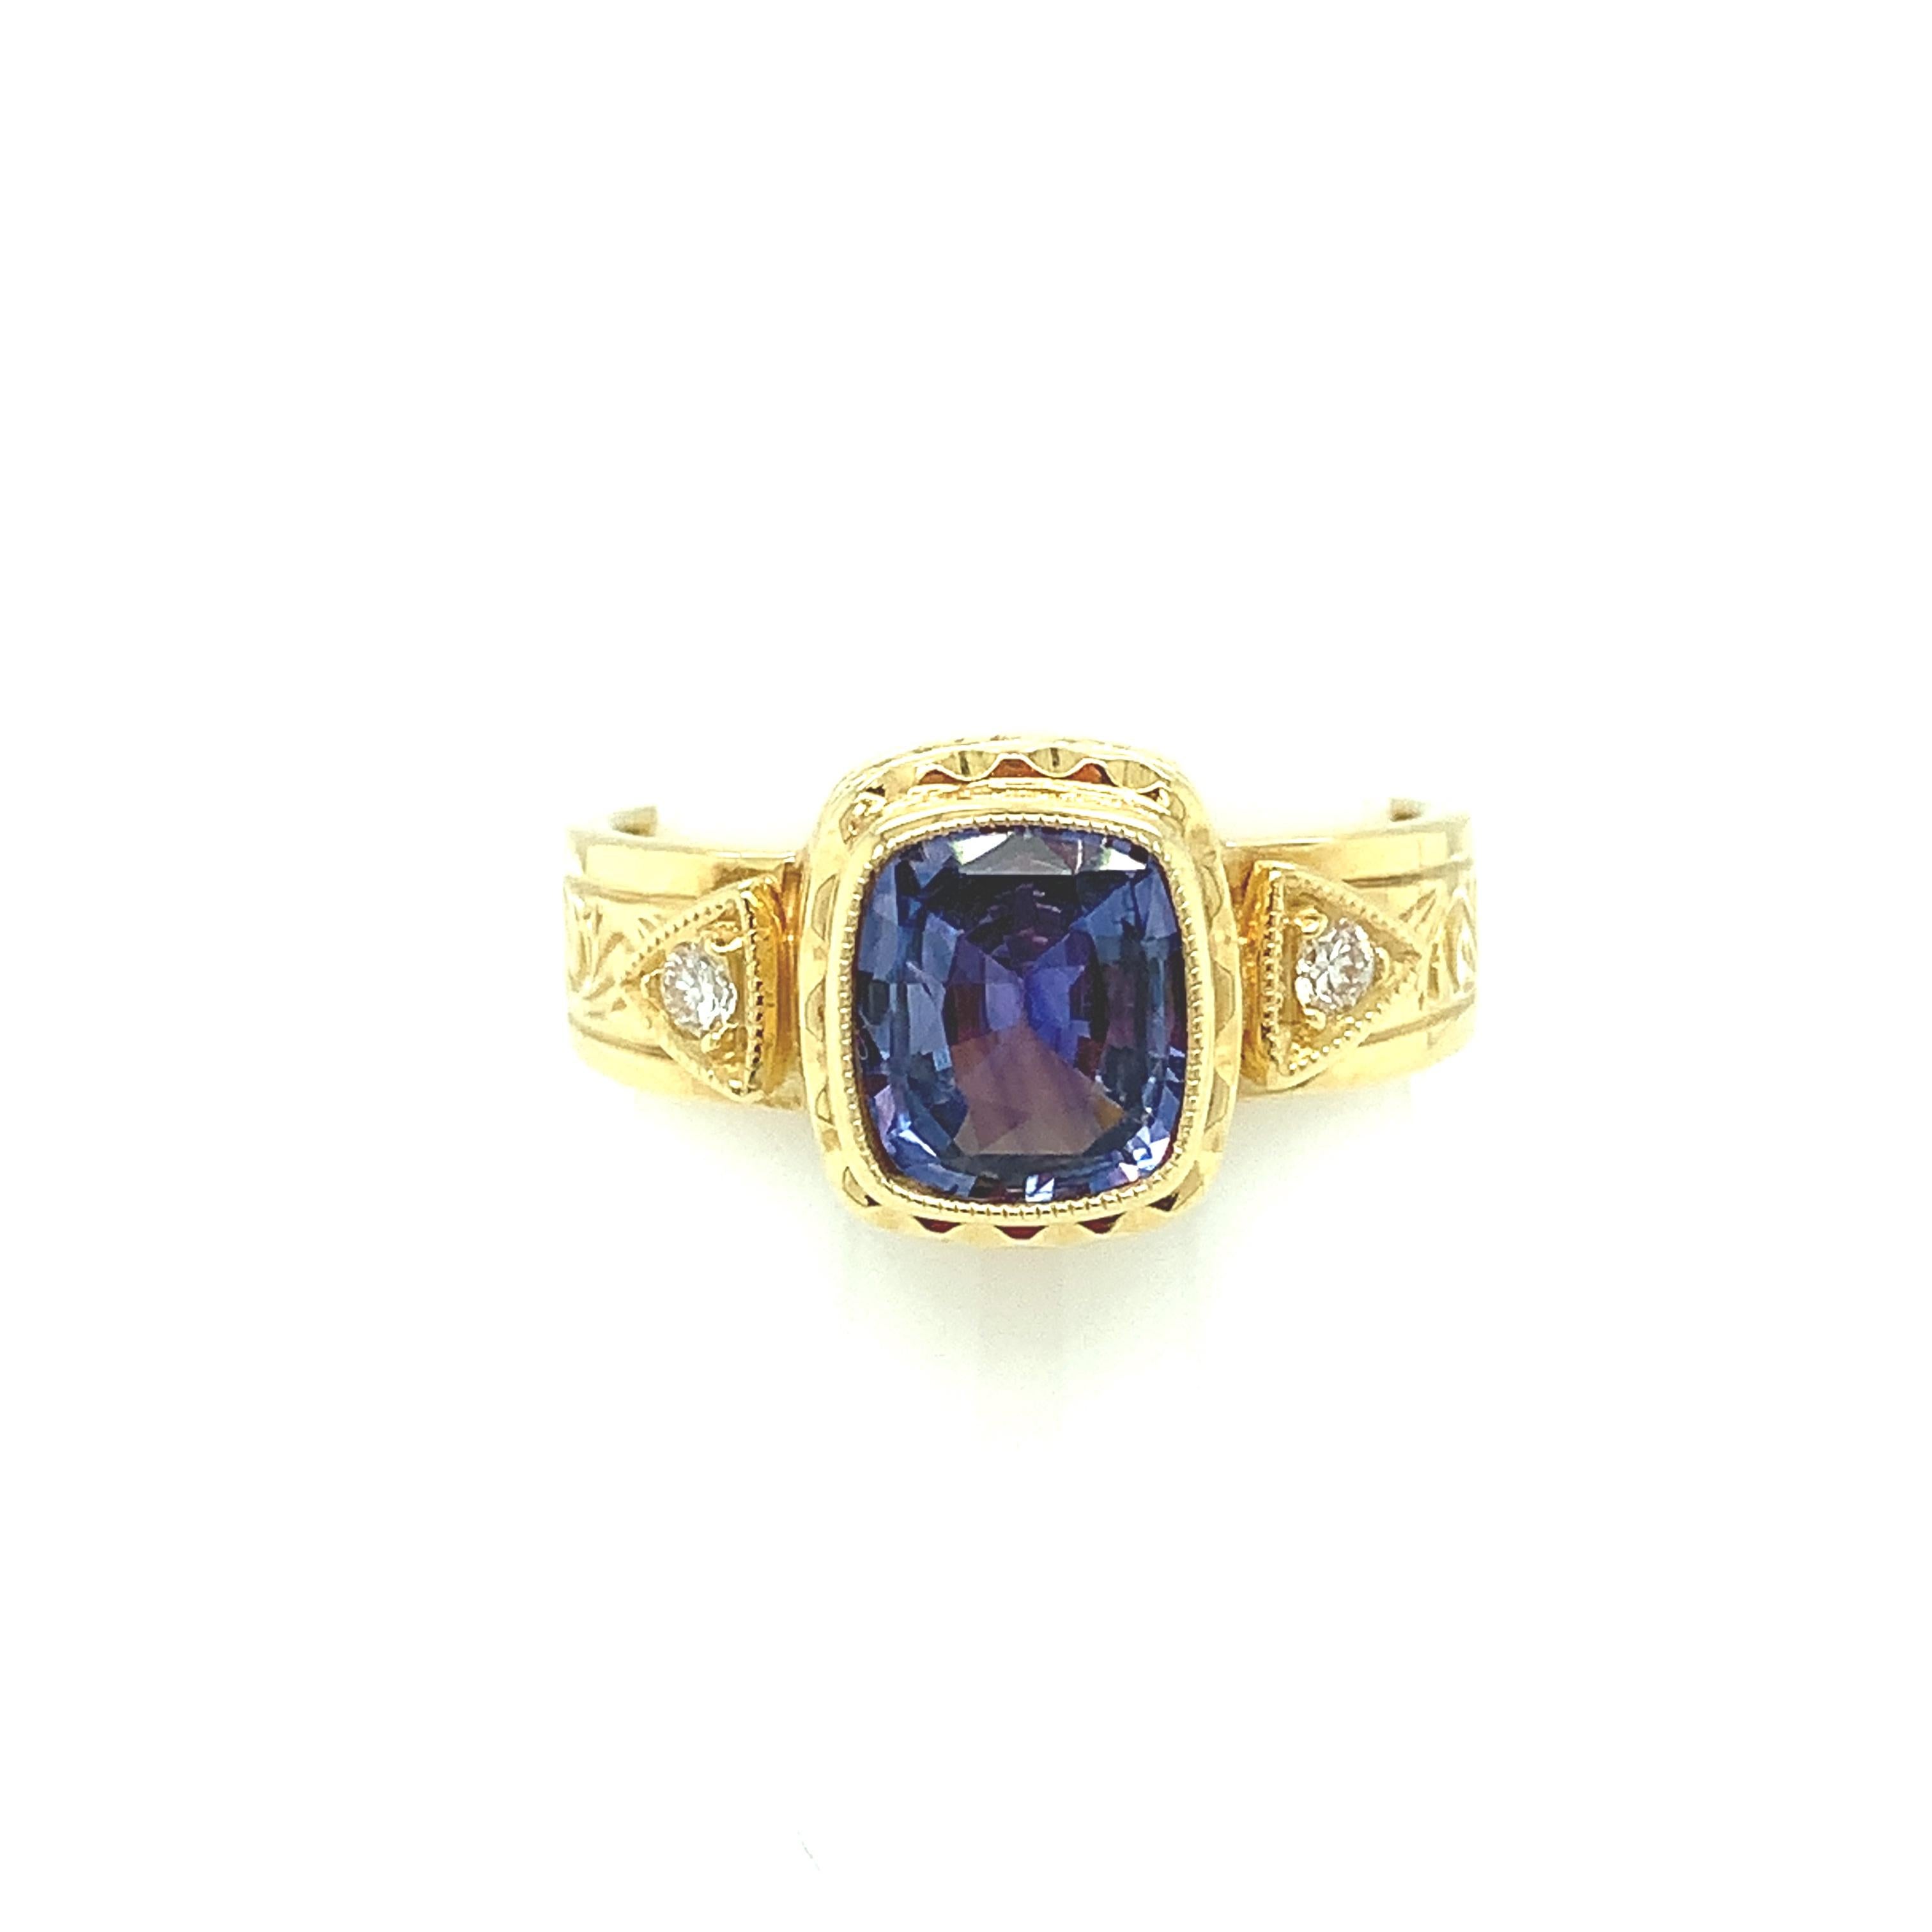 A beautiful, African-violet color sapphire is showcased in this beautifully engraved 18k yellow gold ring which is one of our signature styles. The sapphire is remarkably brilliant and has been bezel set with impeccable precision and finished with